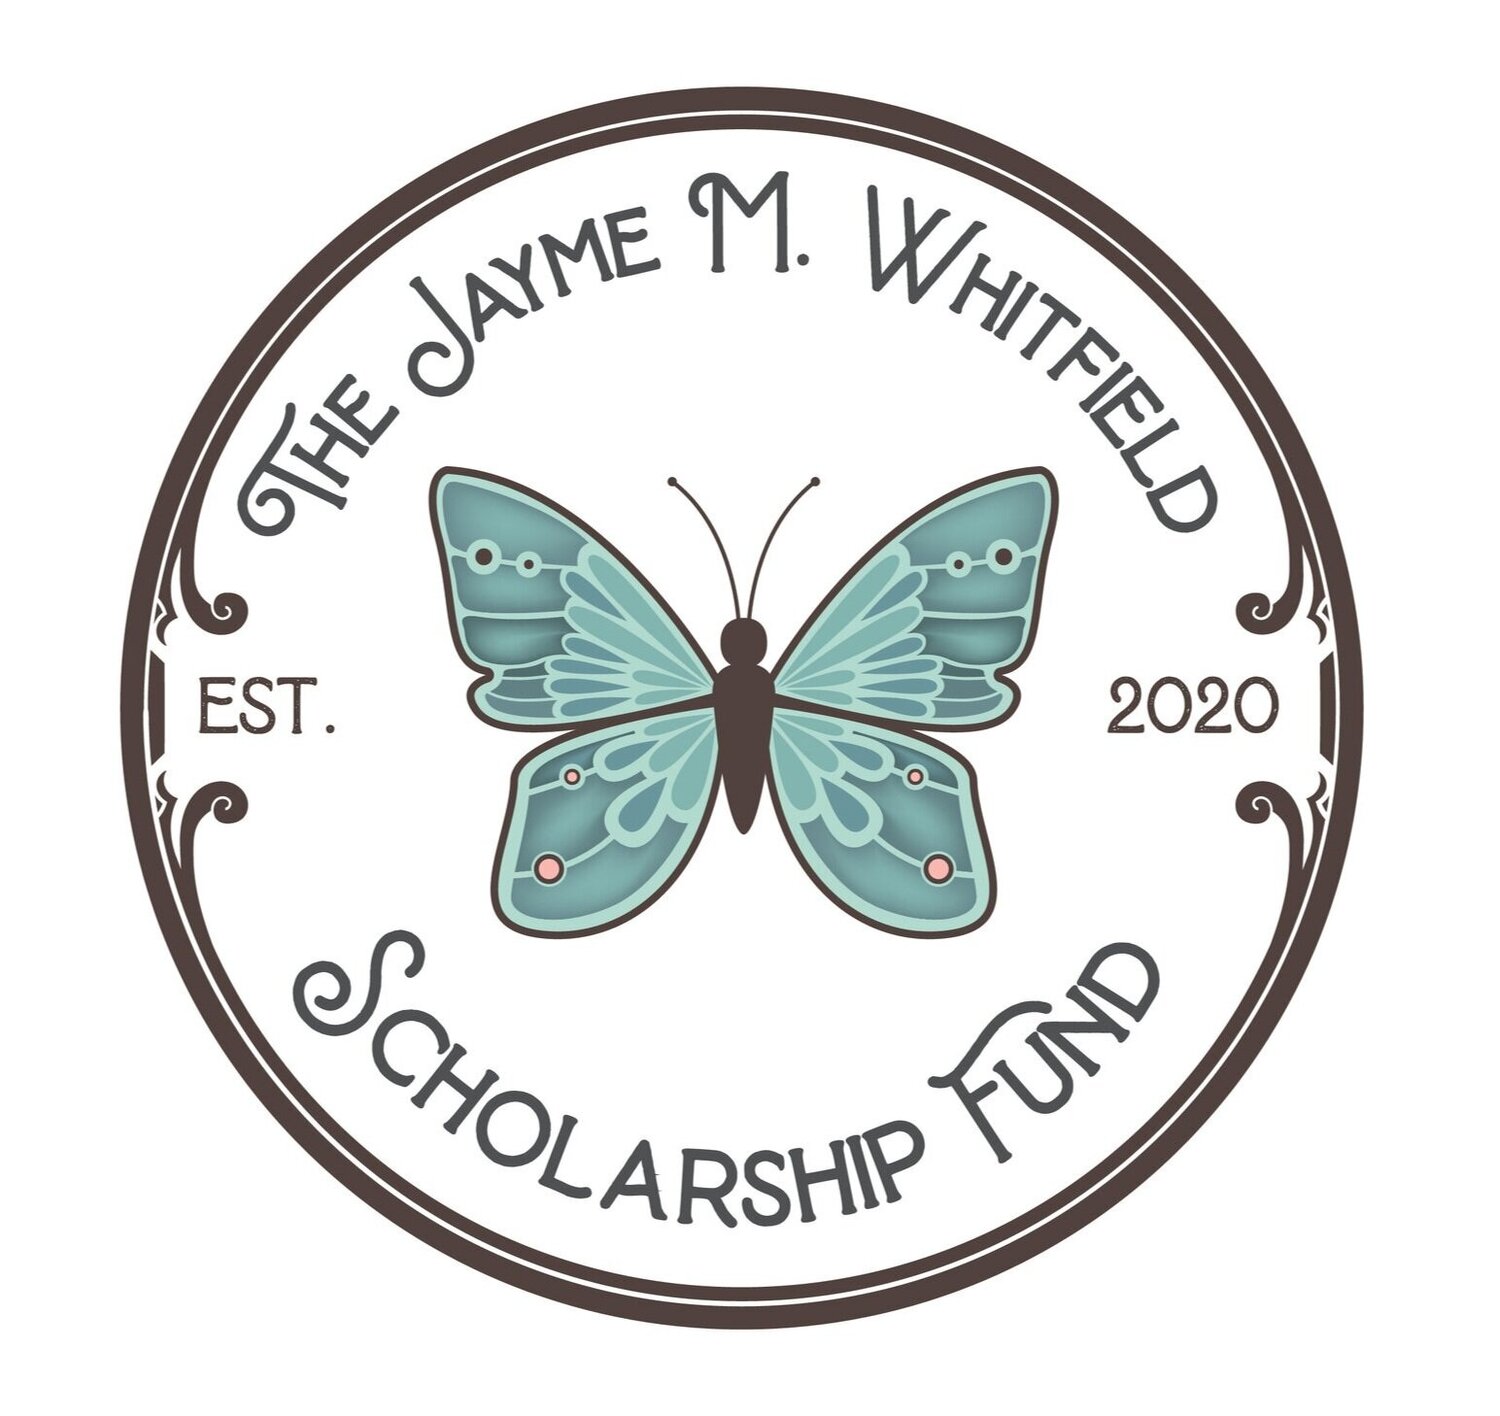 The Jayme M. Whitfield Scholarship Fund